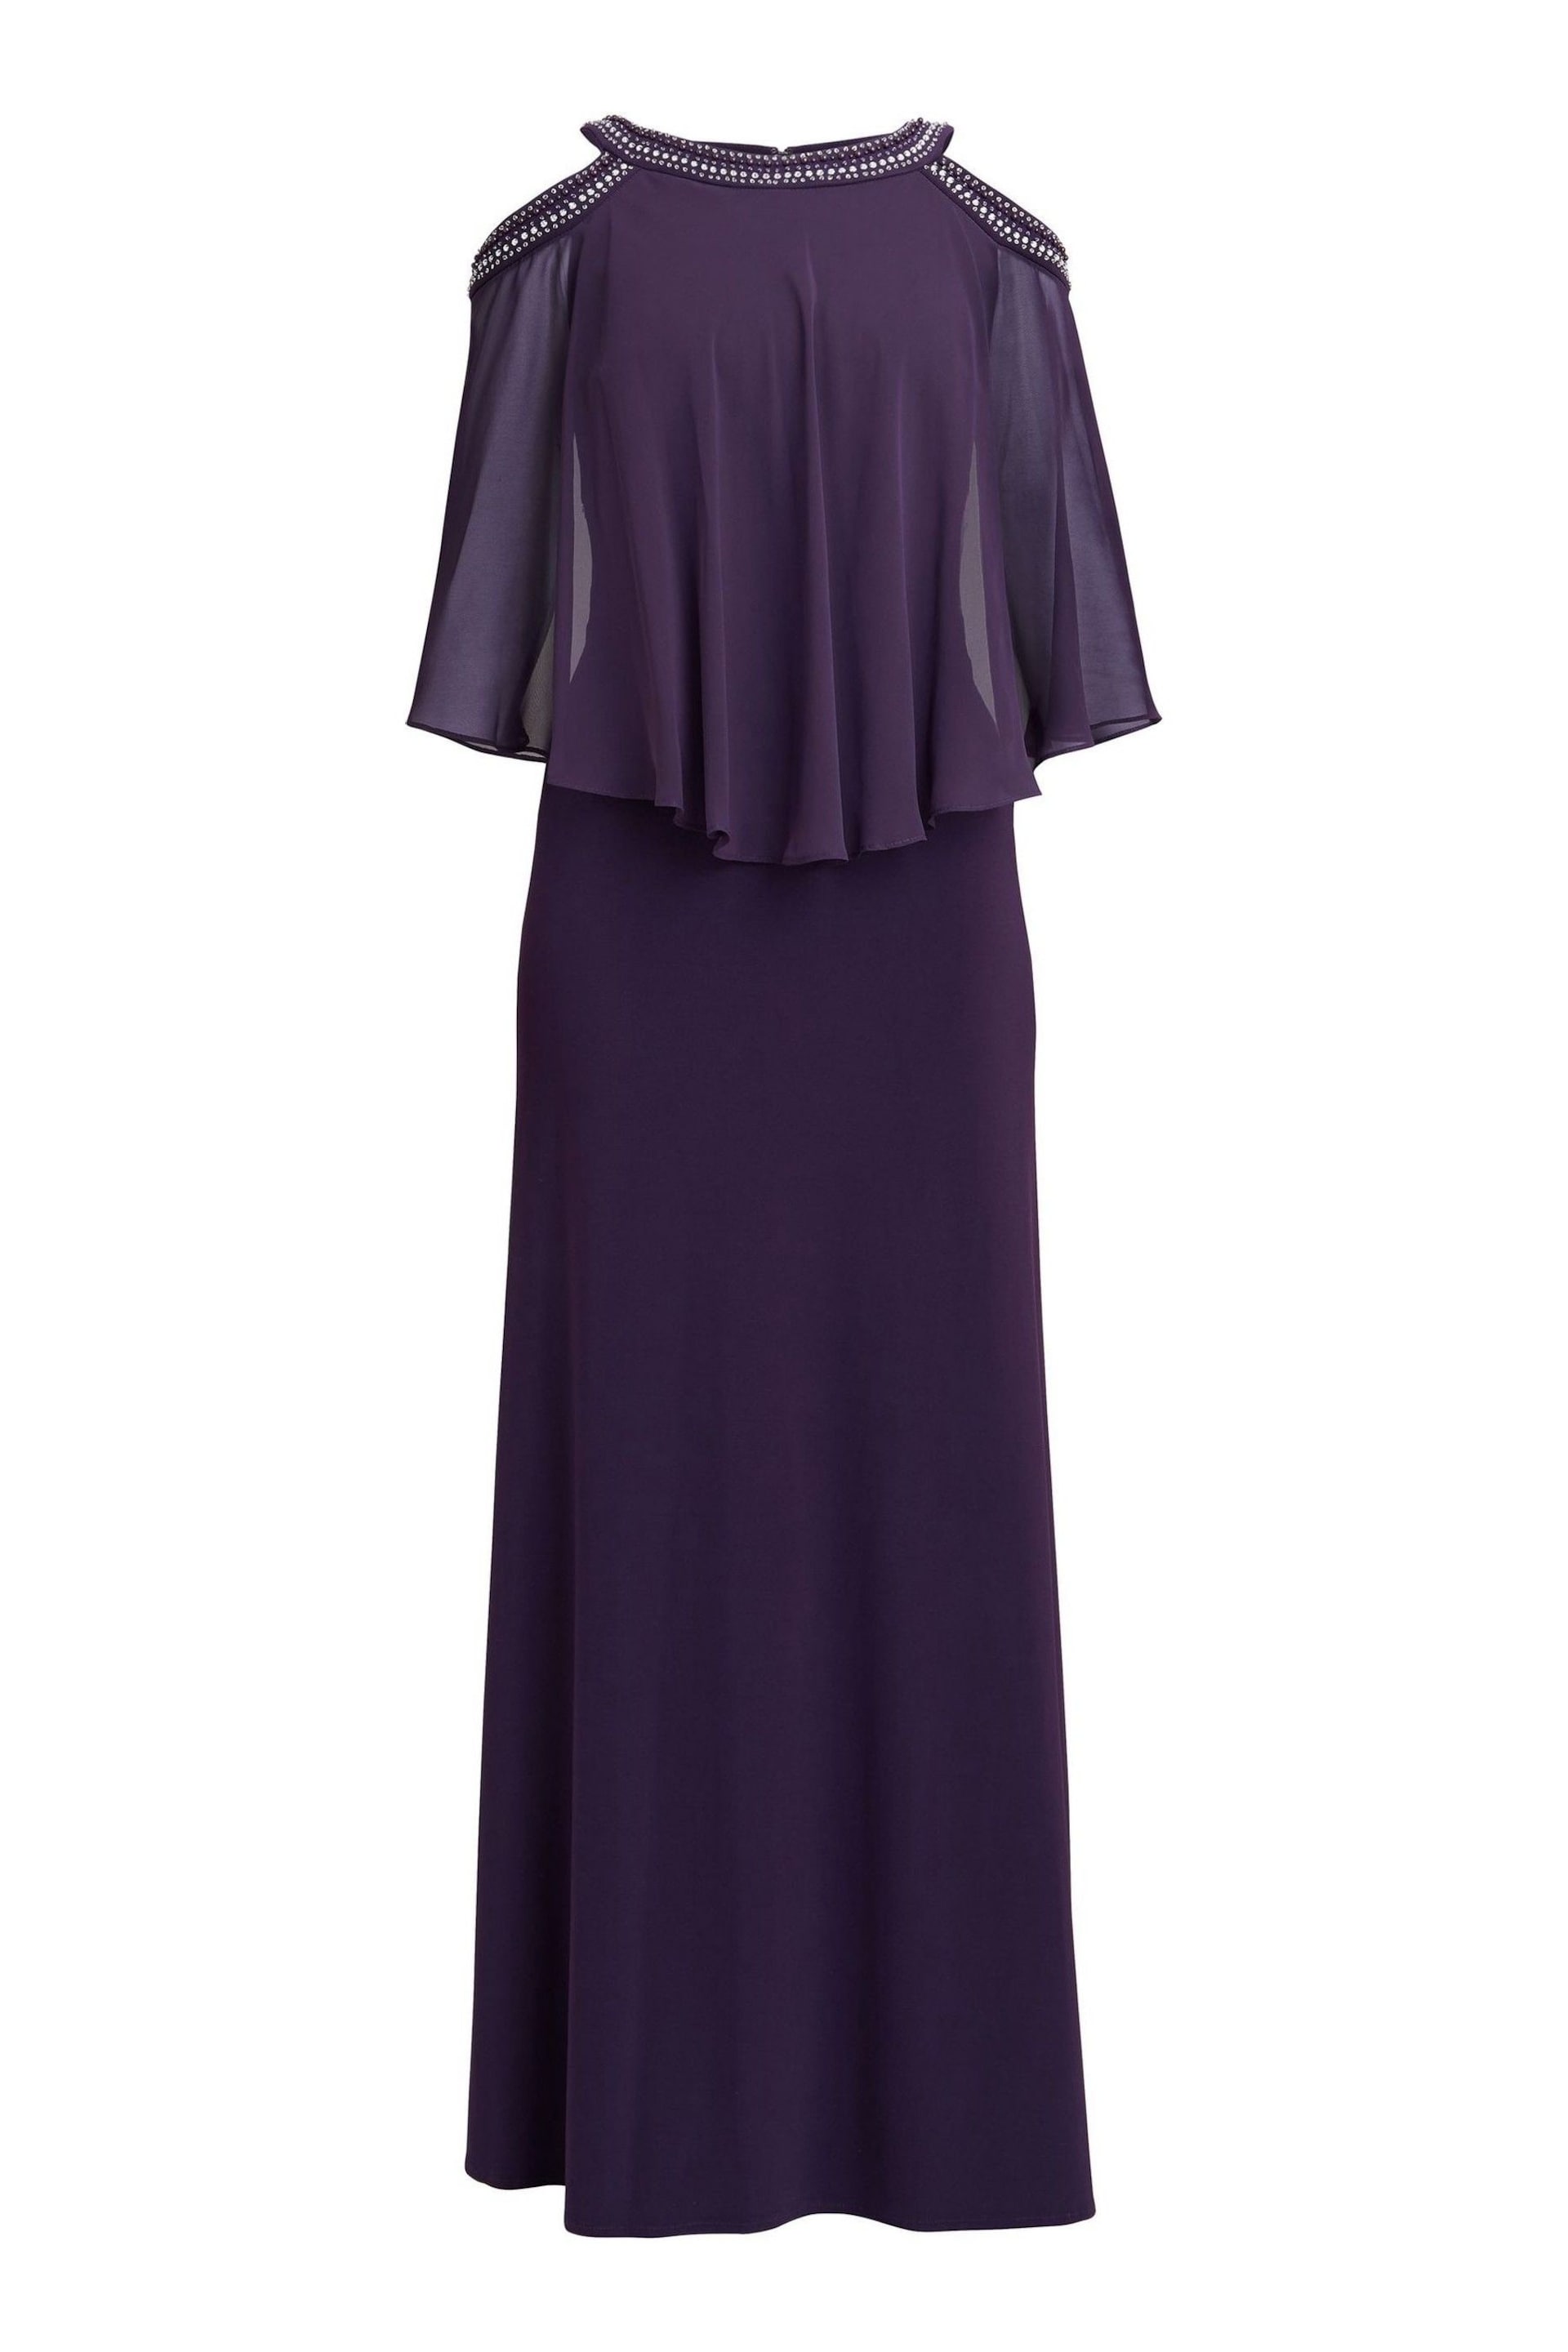 Gina Bacconi Purple Audrey Cold Shoulder Popover Gown With Beaded Neckline - Image 5 of 6